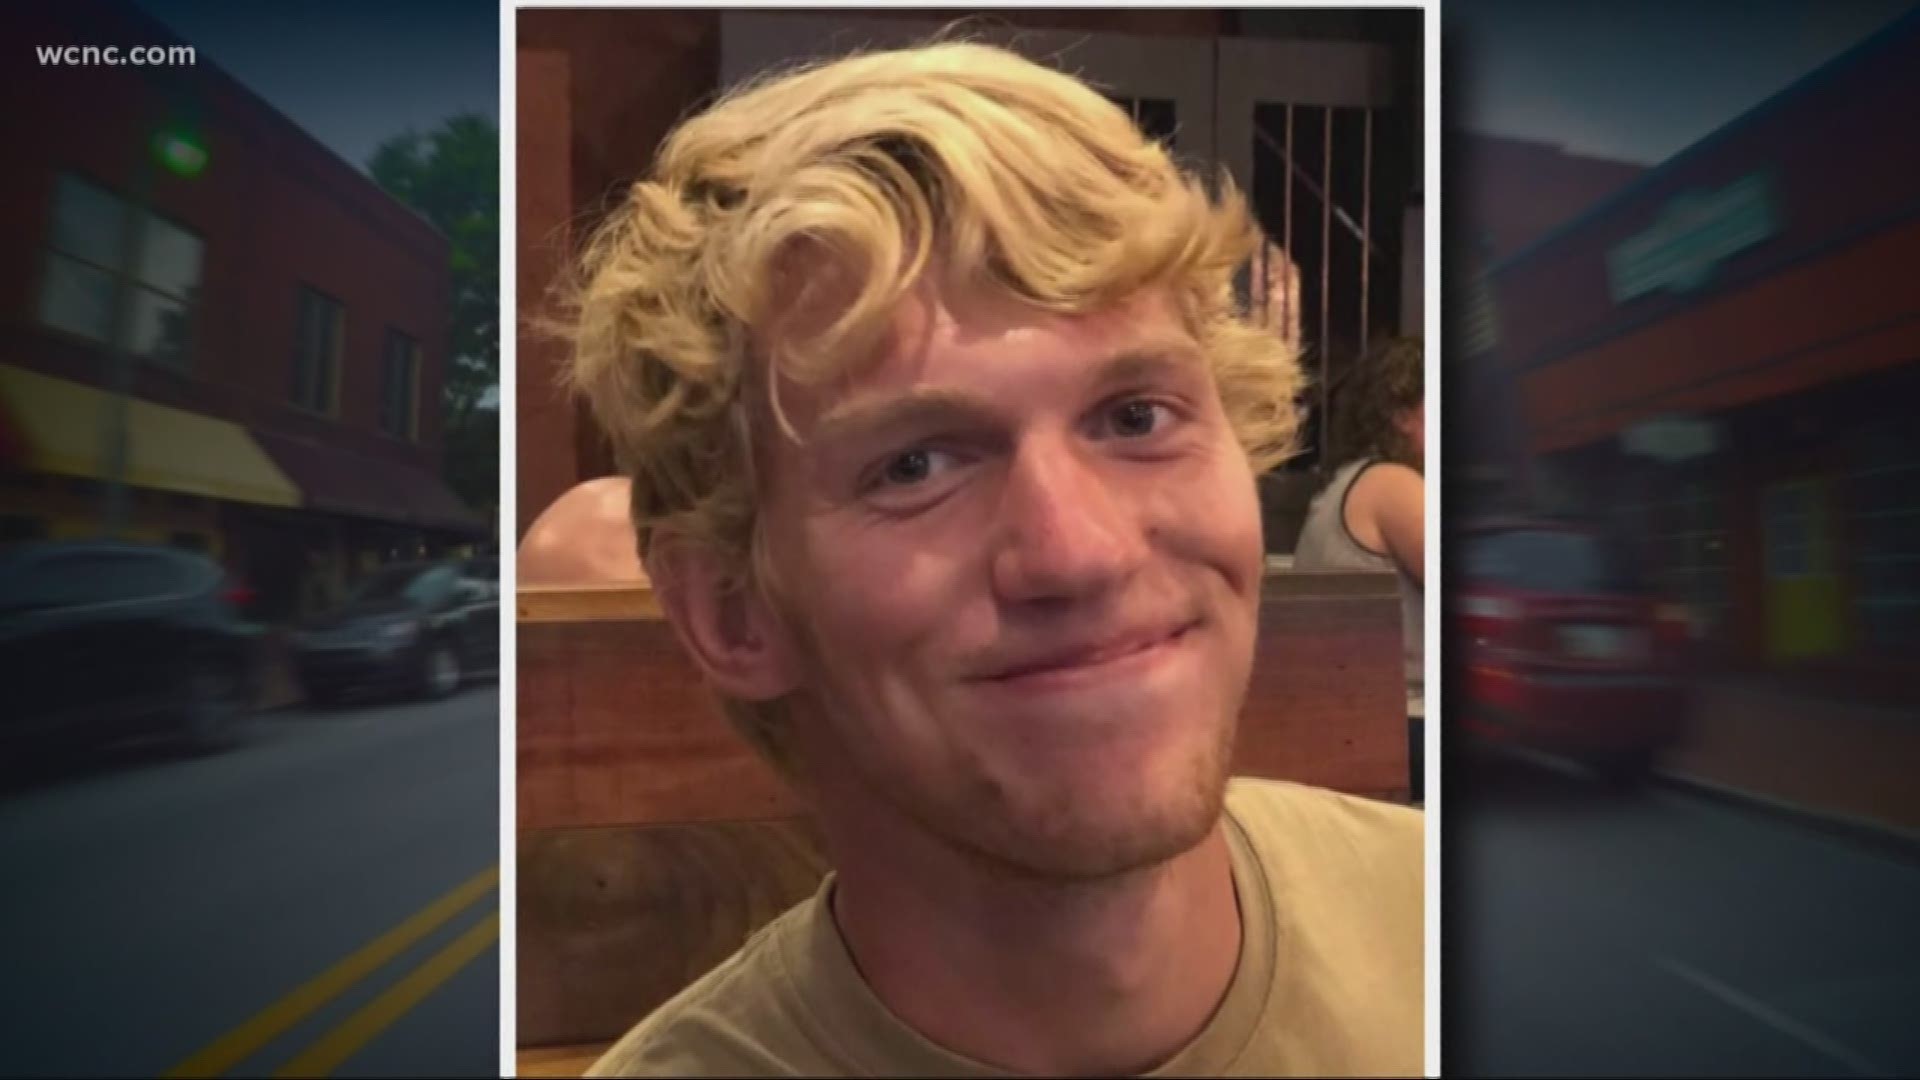 The parents of UNCC student Riley Howell said they're "beyond proud" of their son's brave actions, when he lost his life to protect his classmates.